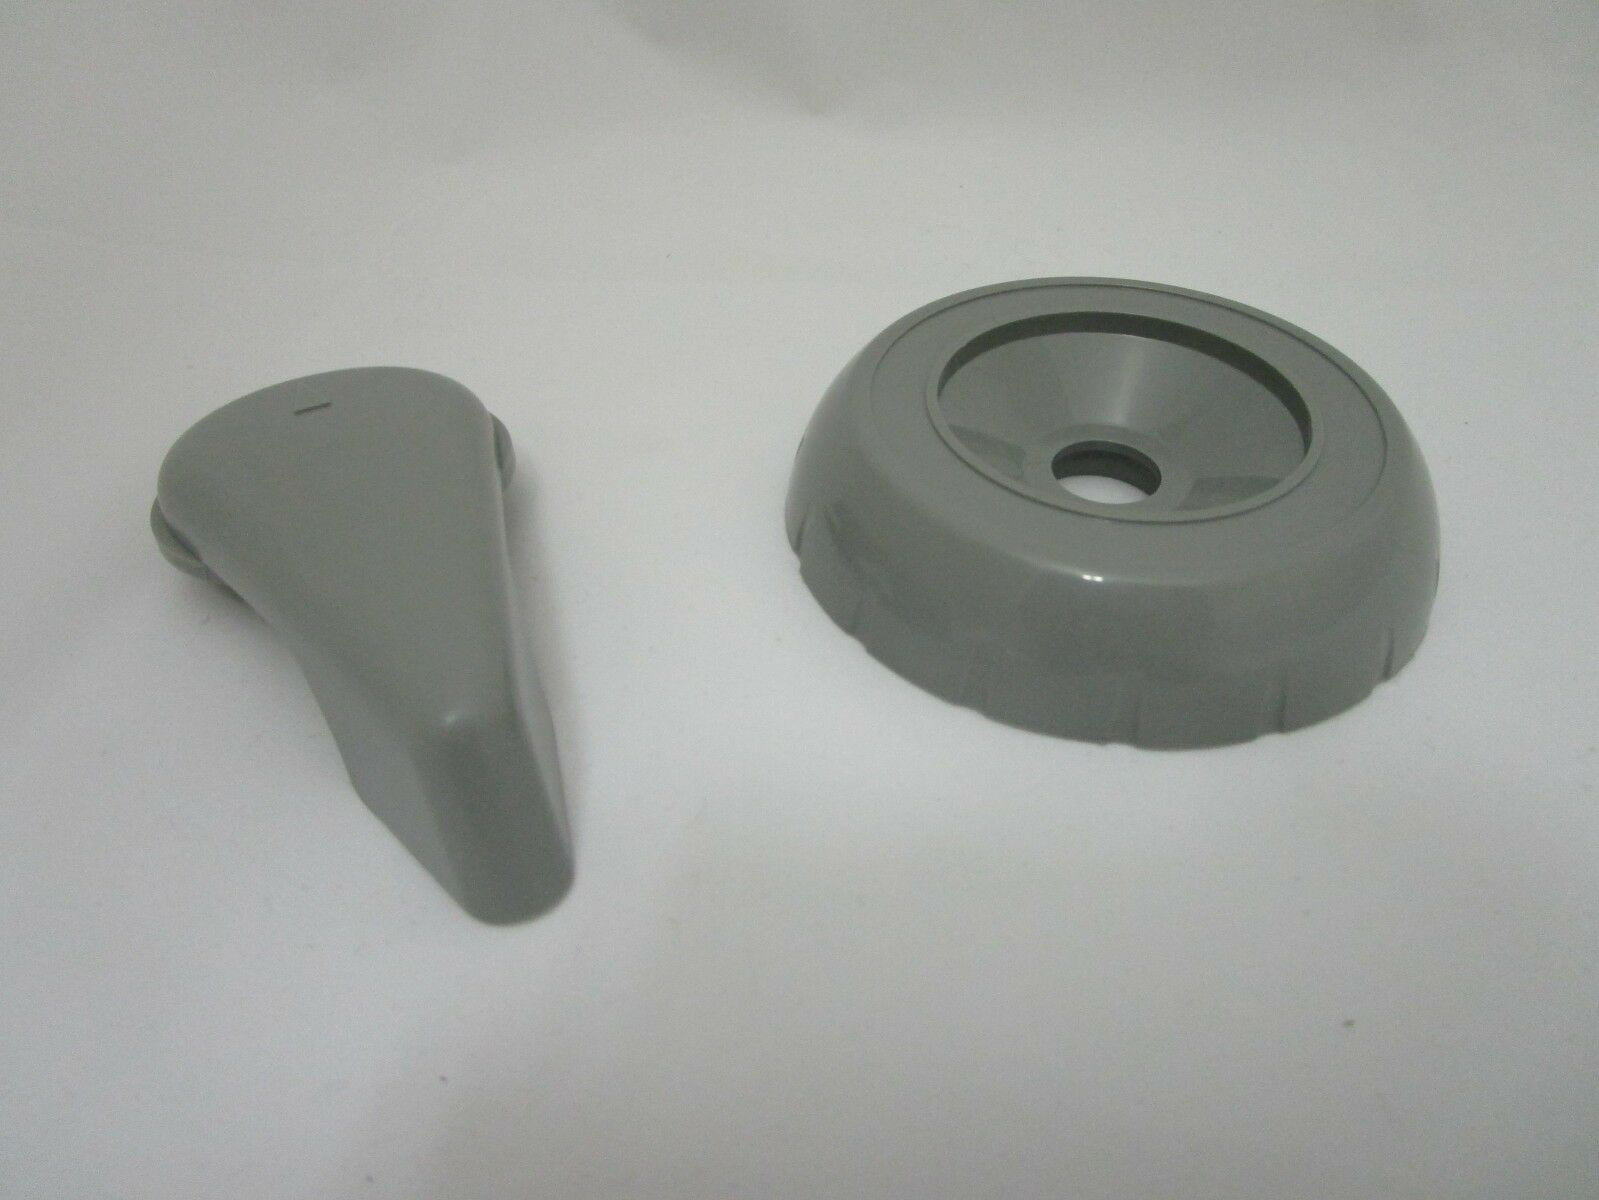 Spa Hot Tub Diverter Handle & Cap 3 3/4" Wide Gray Notched Valve How To Video 